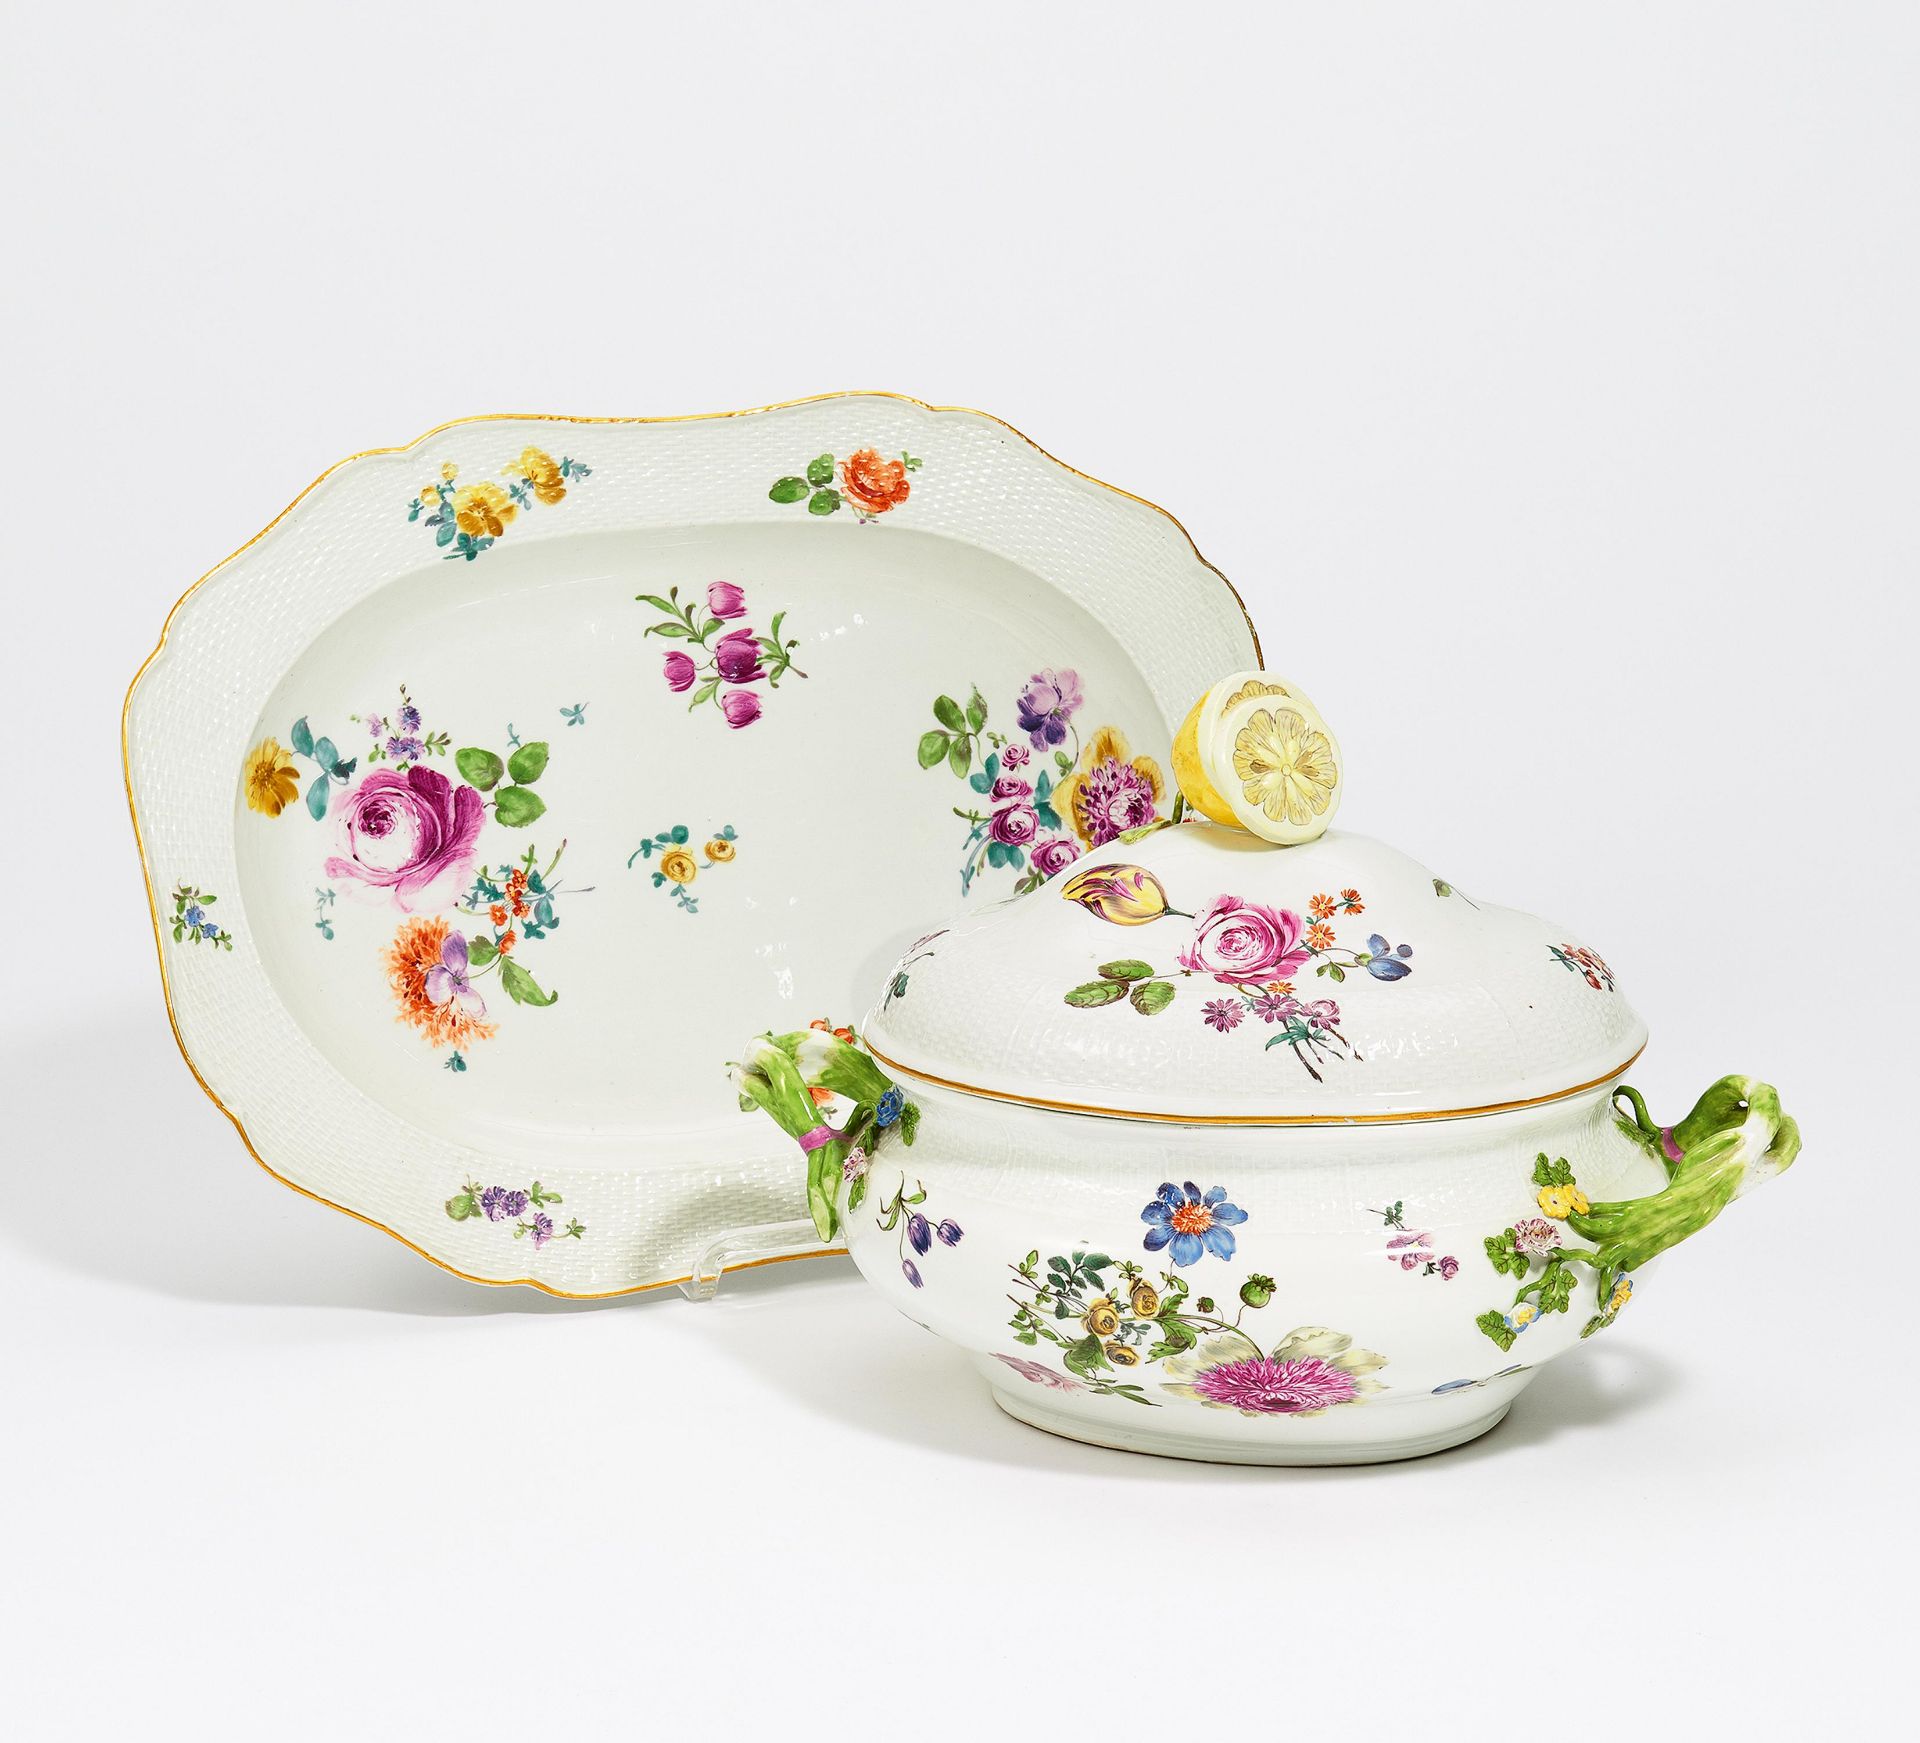 LARGE PORCELAIN TUREEN WITH FINIAL FORMED AS A LEMON. Meissen. Ca. 1760/70. Porcelain, decorated